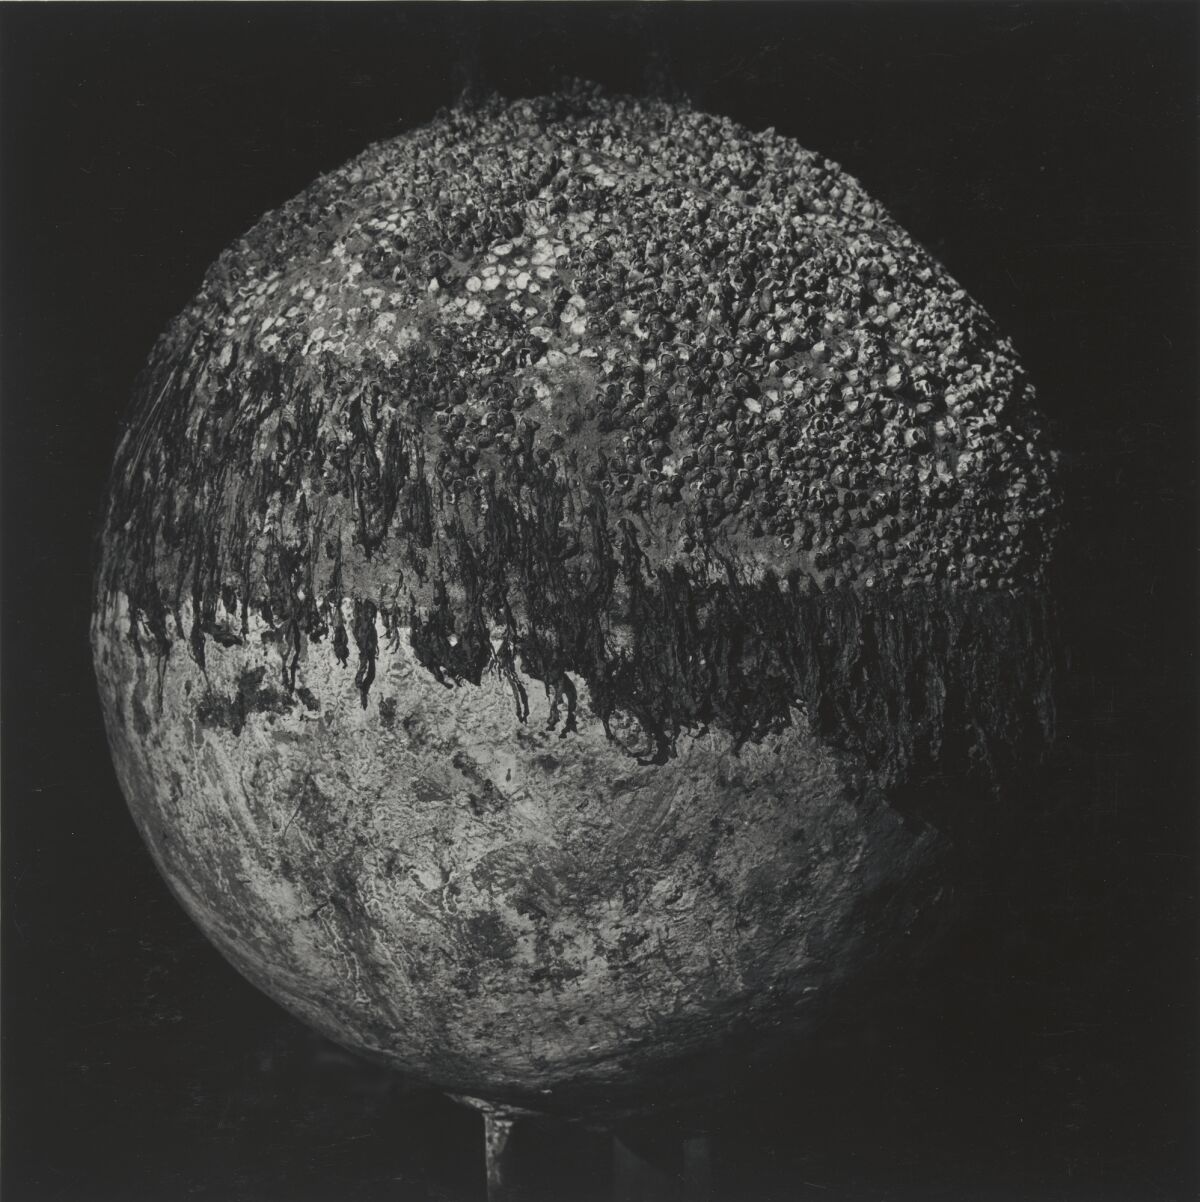 An abstracted black and white photograph depicts a sphere with gritty textures.